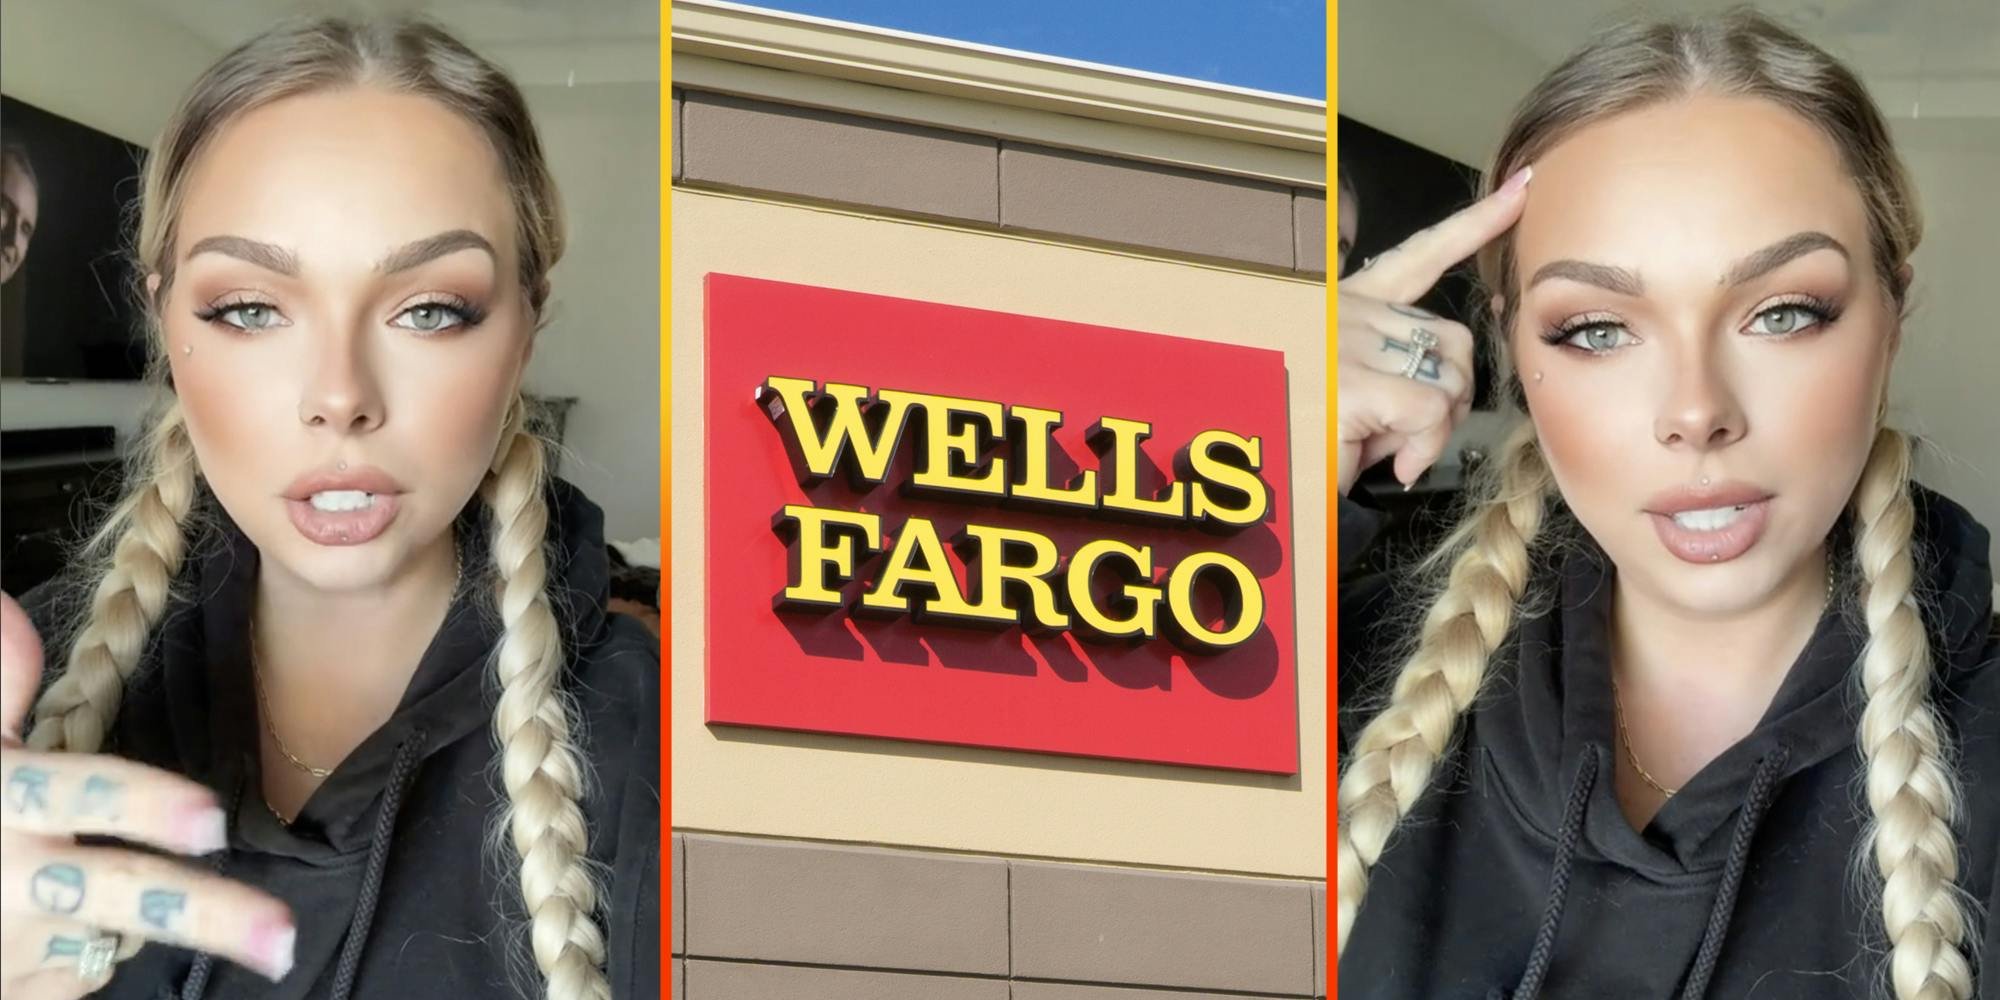 ‘Aren’t you a bank?’: Wells Fargo customer can’t deposit earnings into her account. Why?